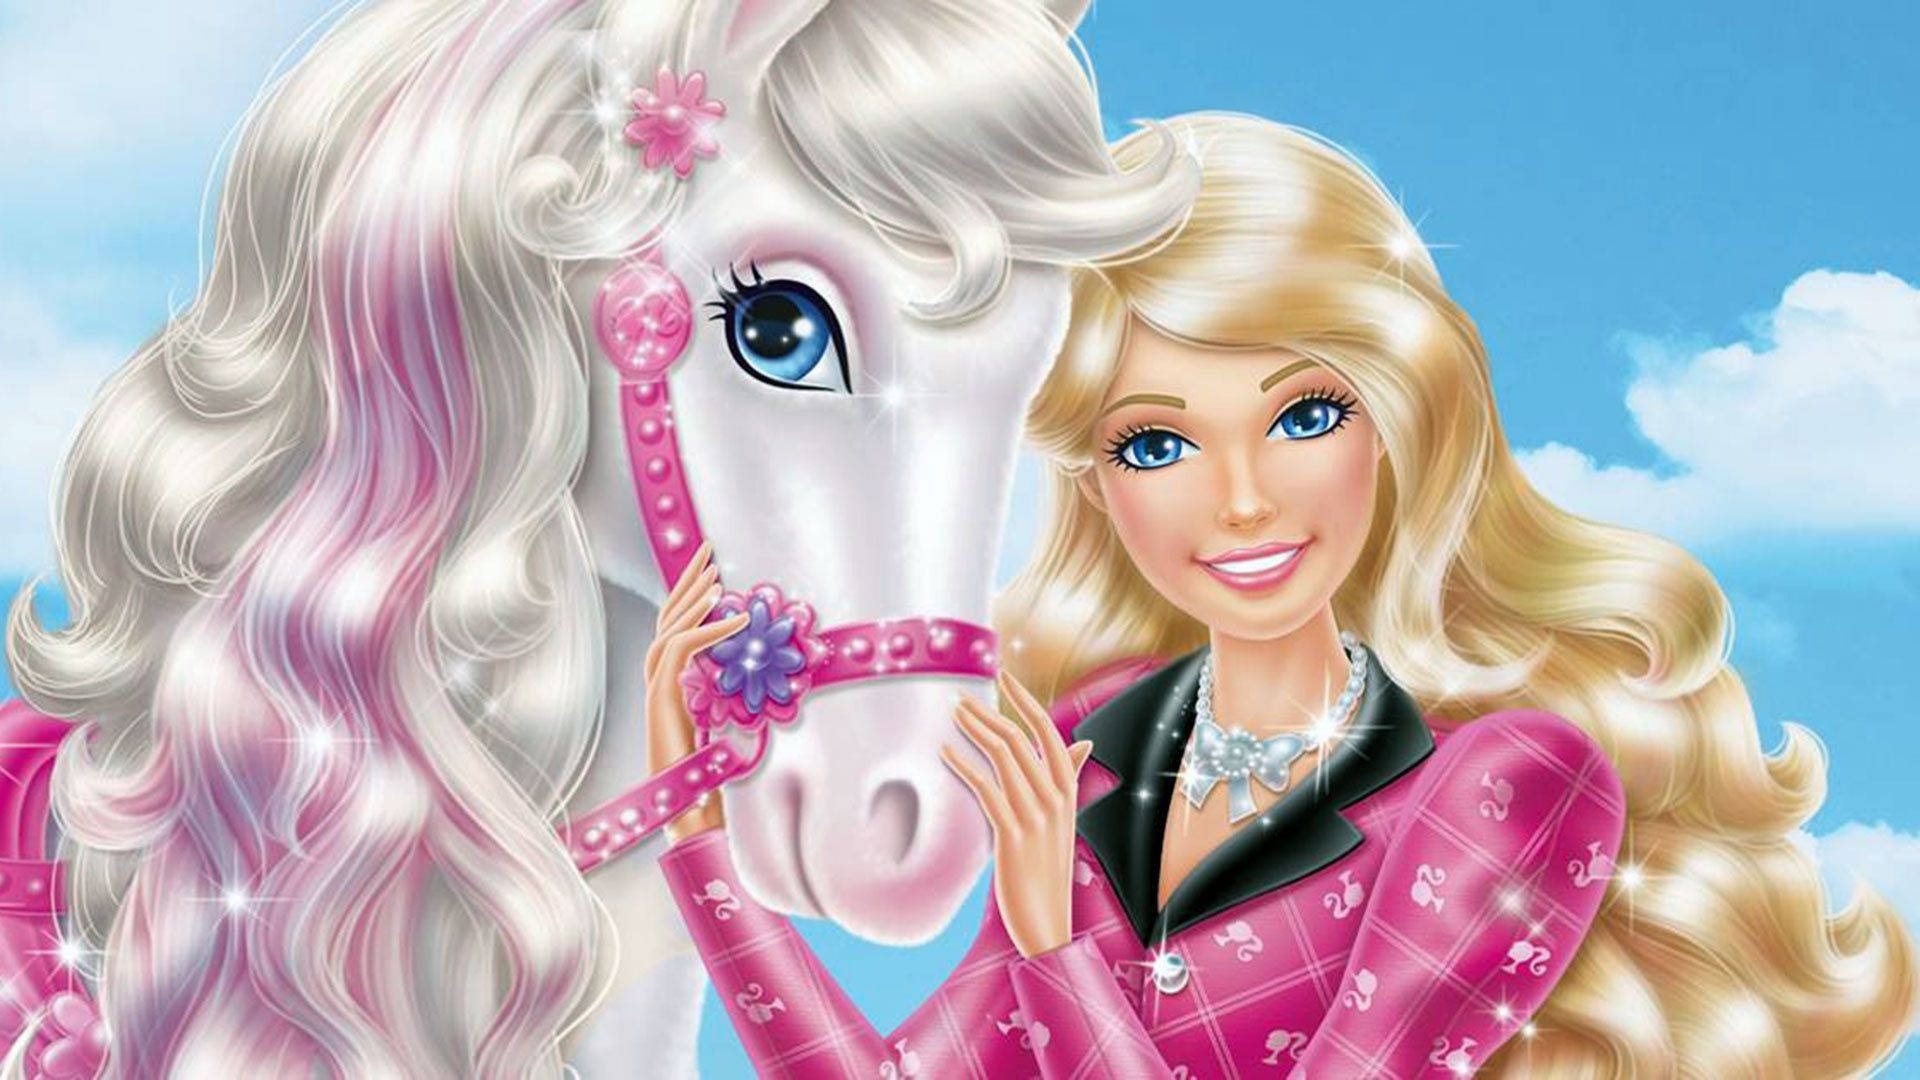 Free Barbie Wallpaper Downloads, [100+] Barbie Wallpapers for FREE |  